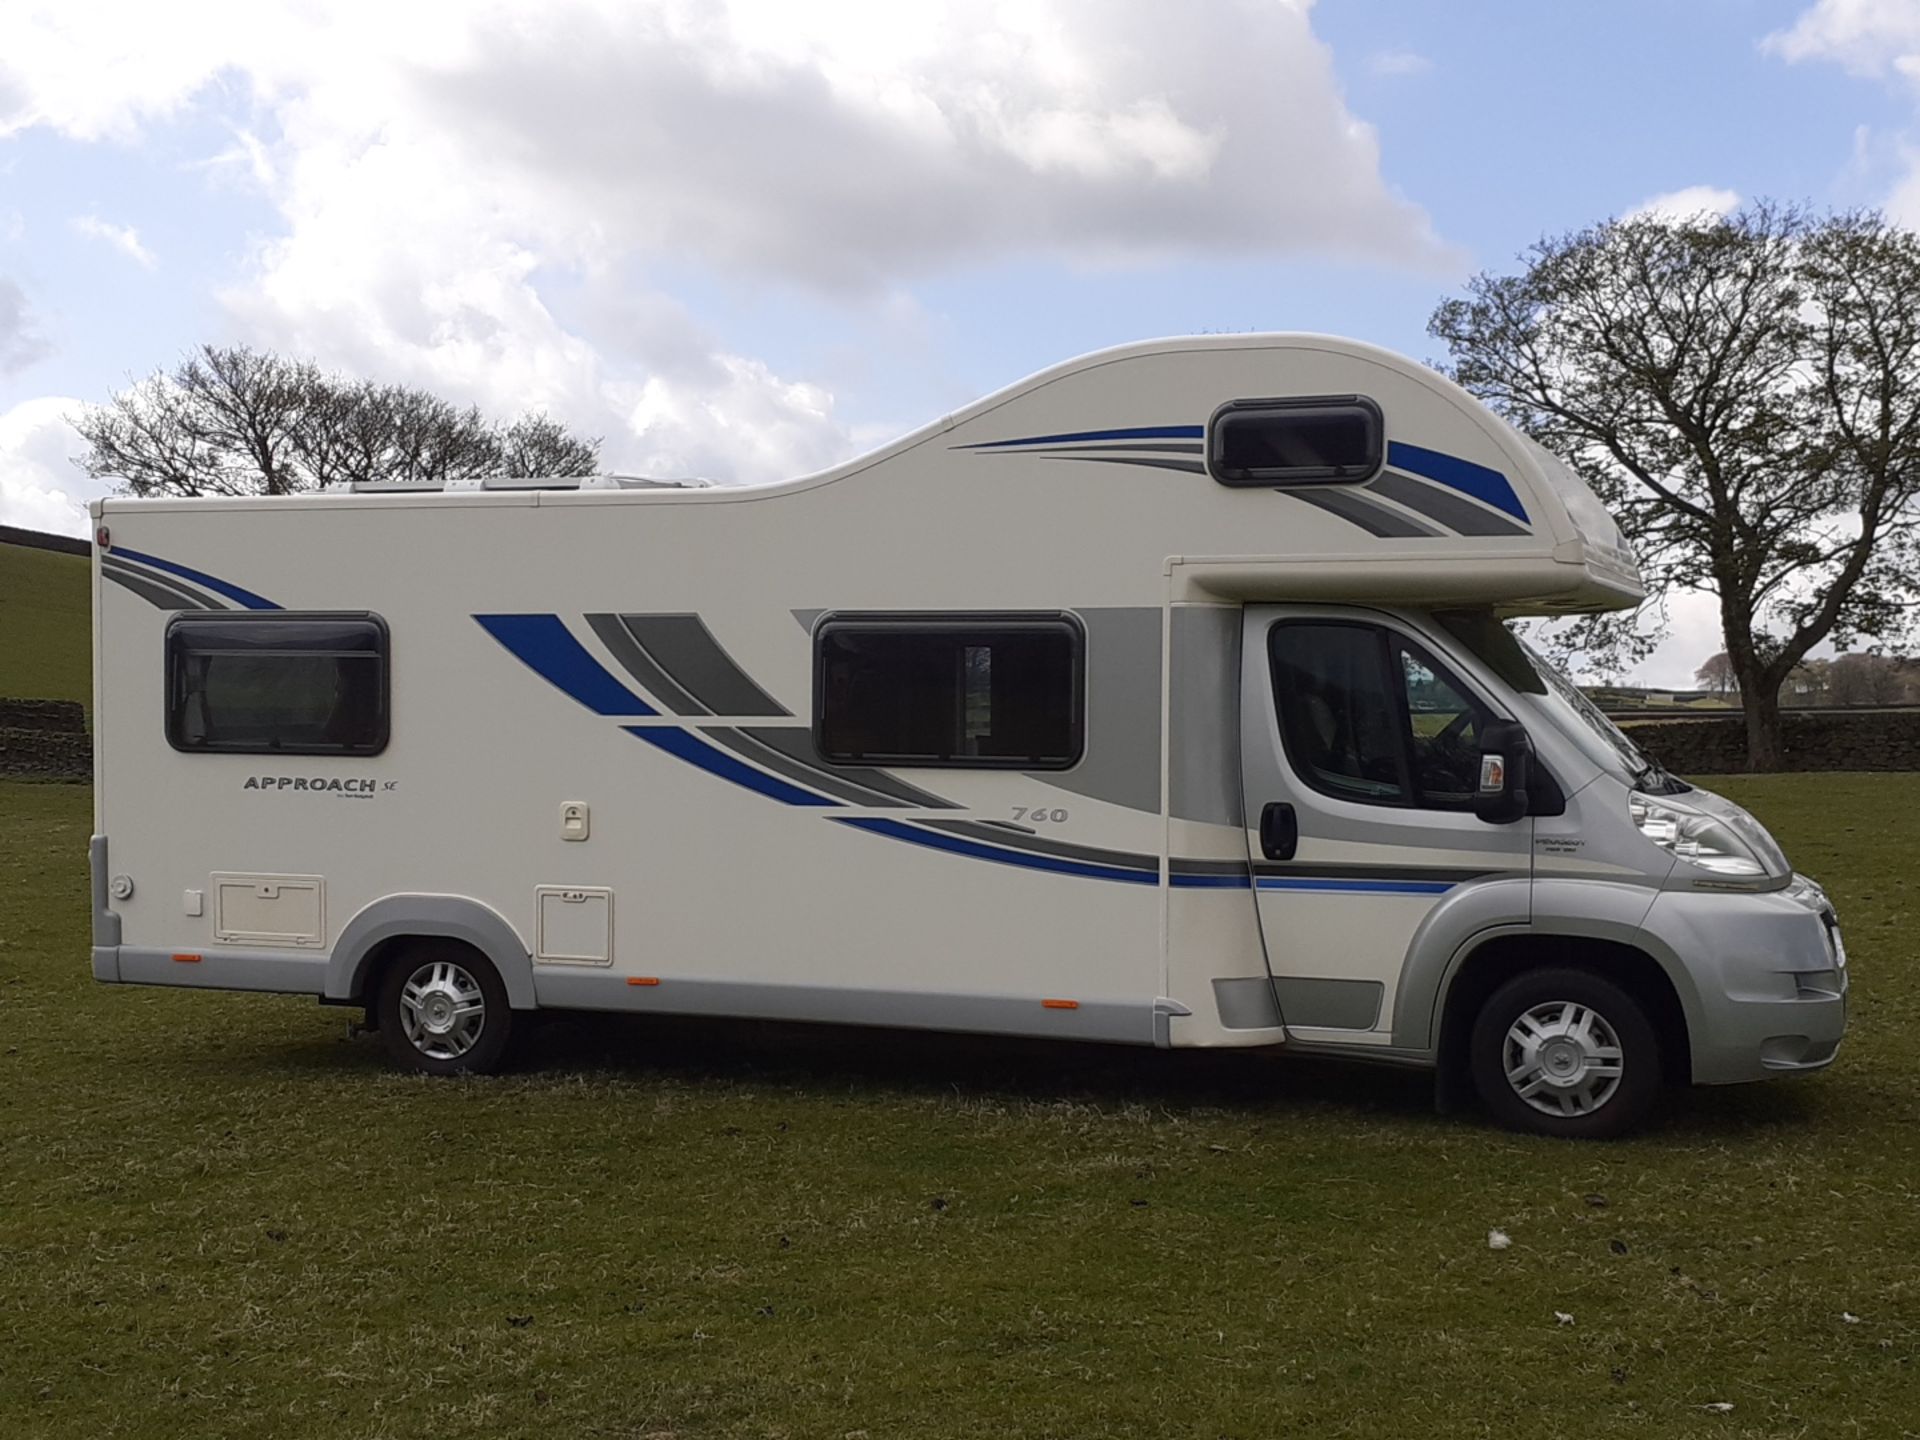 2012 BAILEY APPROACH 760 SE LUXURY 6 BERTH MOTORHOME £10K OF EXTRAS, 30,000 MILES FROM NEW